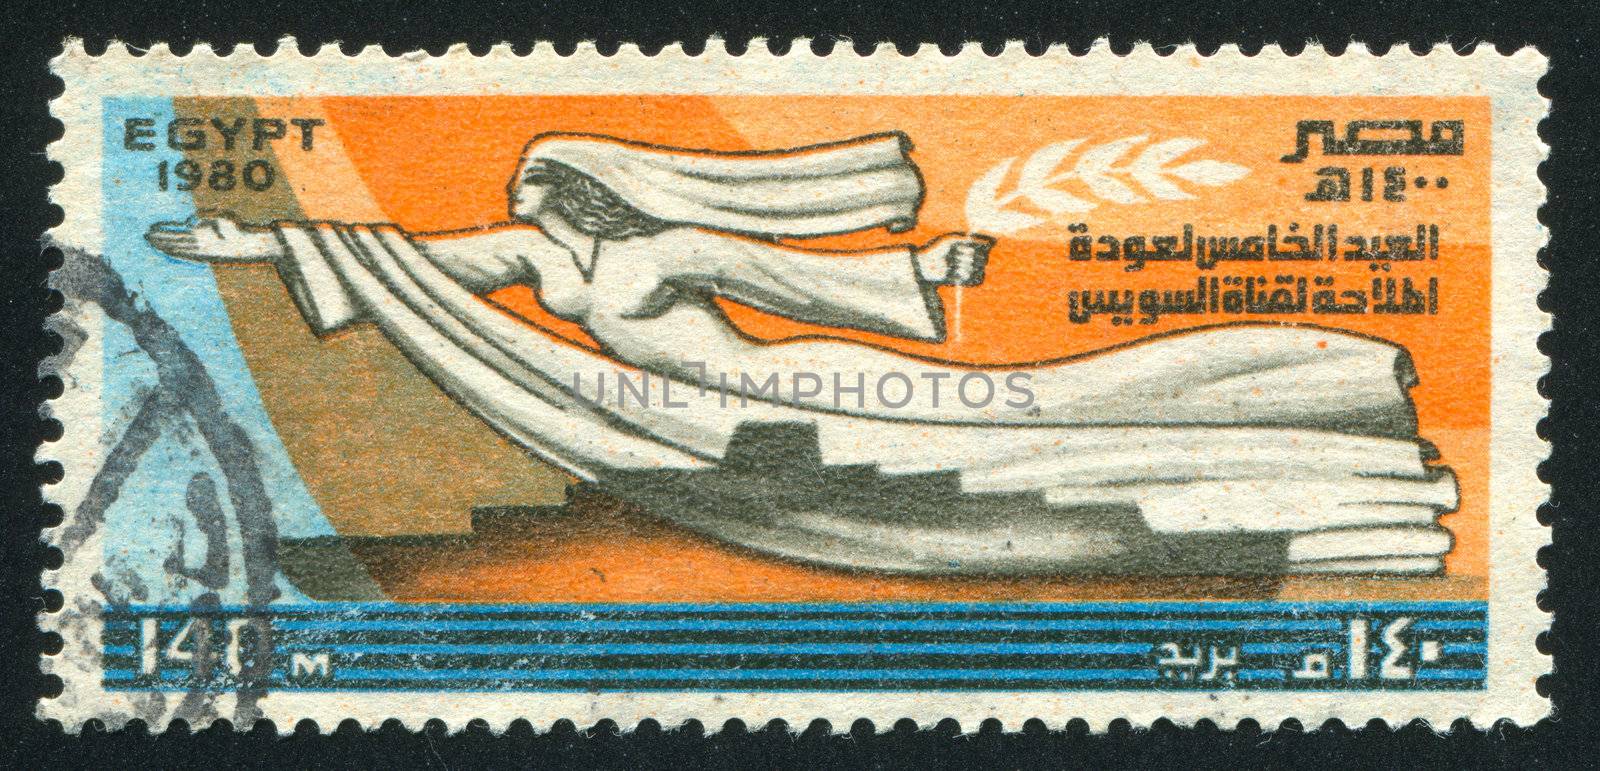 EGYPT - CIRCA 1980: stamp printed by Egypt, shows Flying woman with cone, Ship, circa 1980